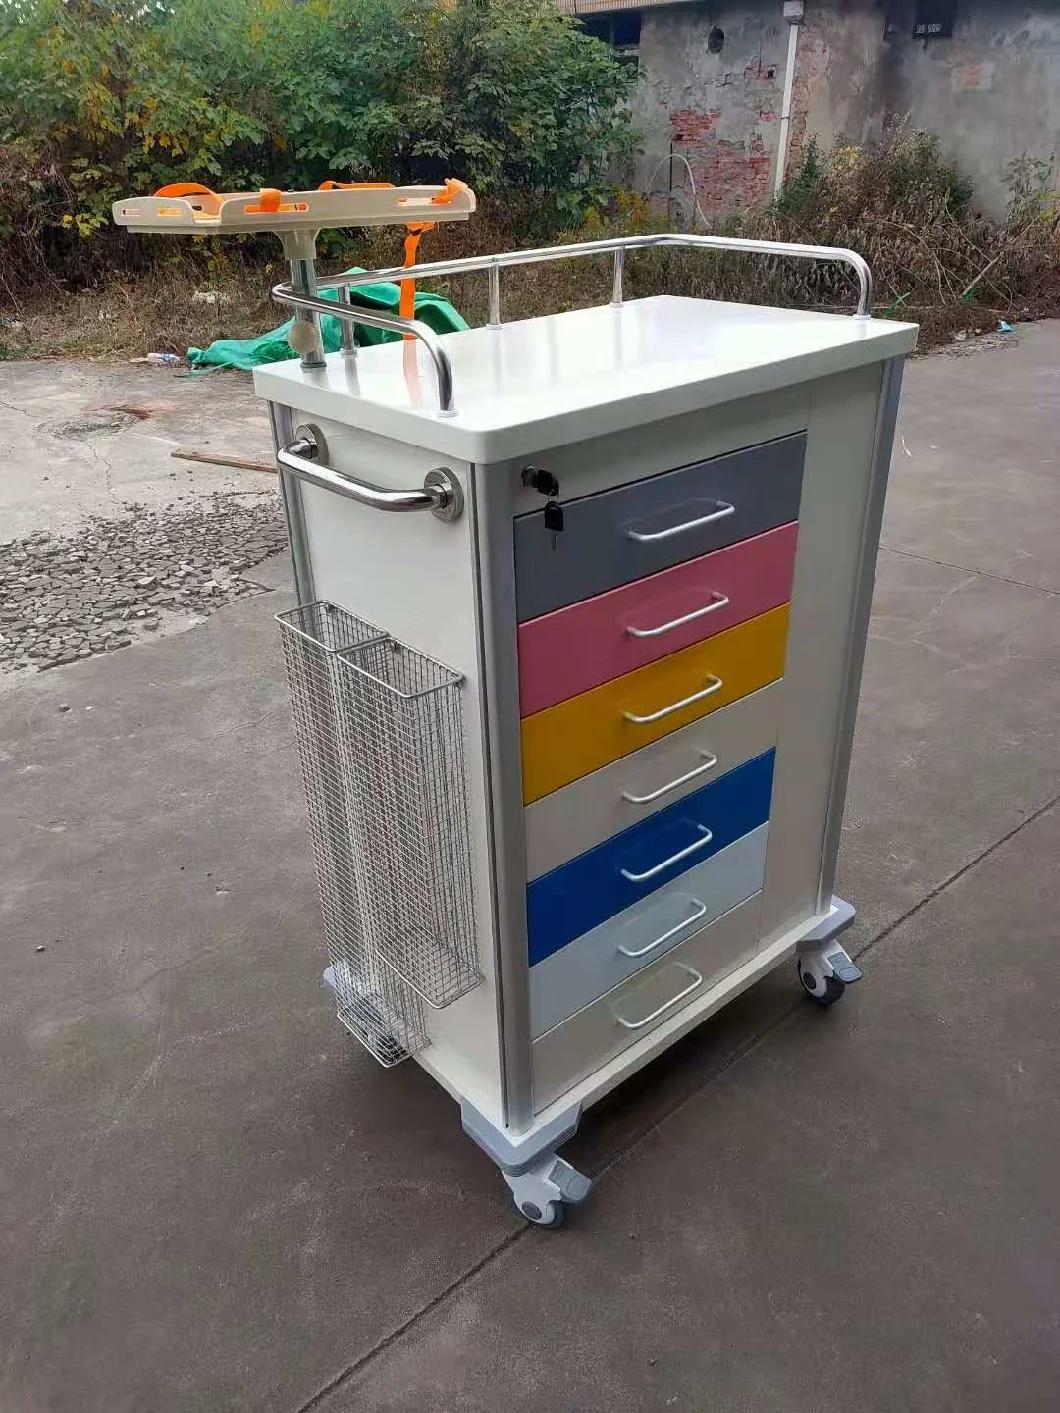 Mt Medical in Stock China Manufacture Medical Hospital Emergency Trolley